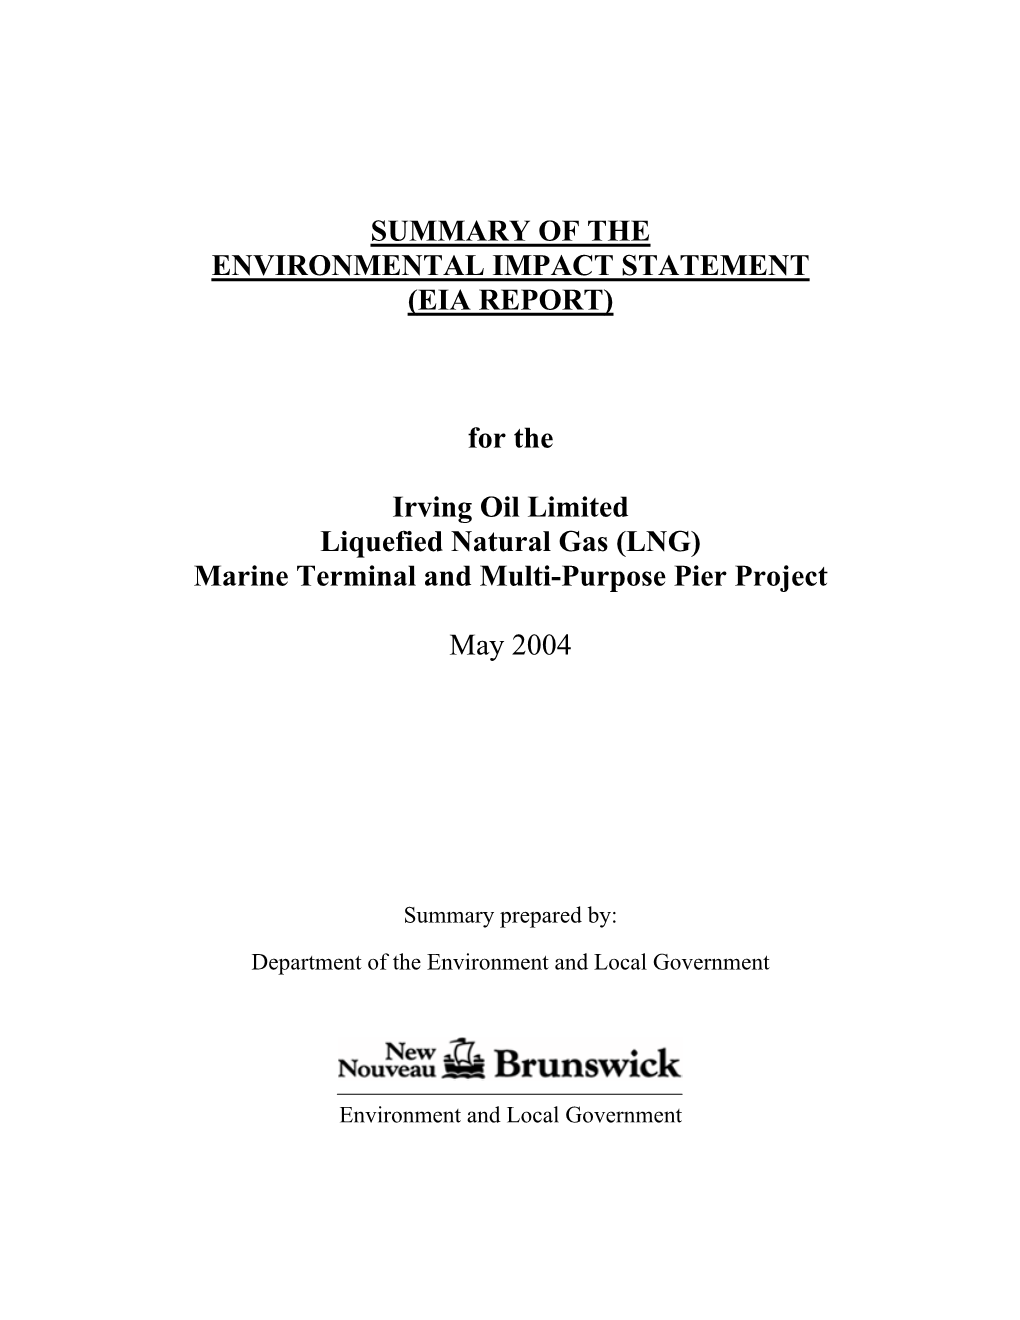 Summary of the Environmental Impact Statement (Eia Report)